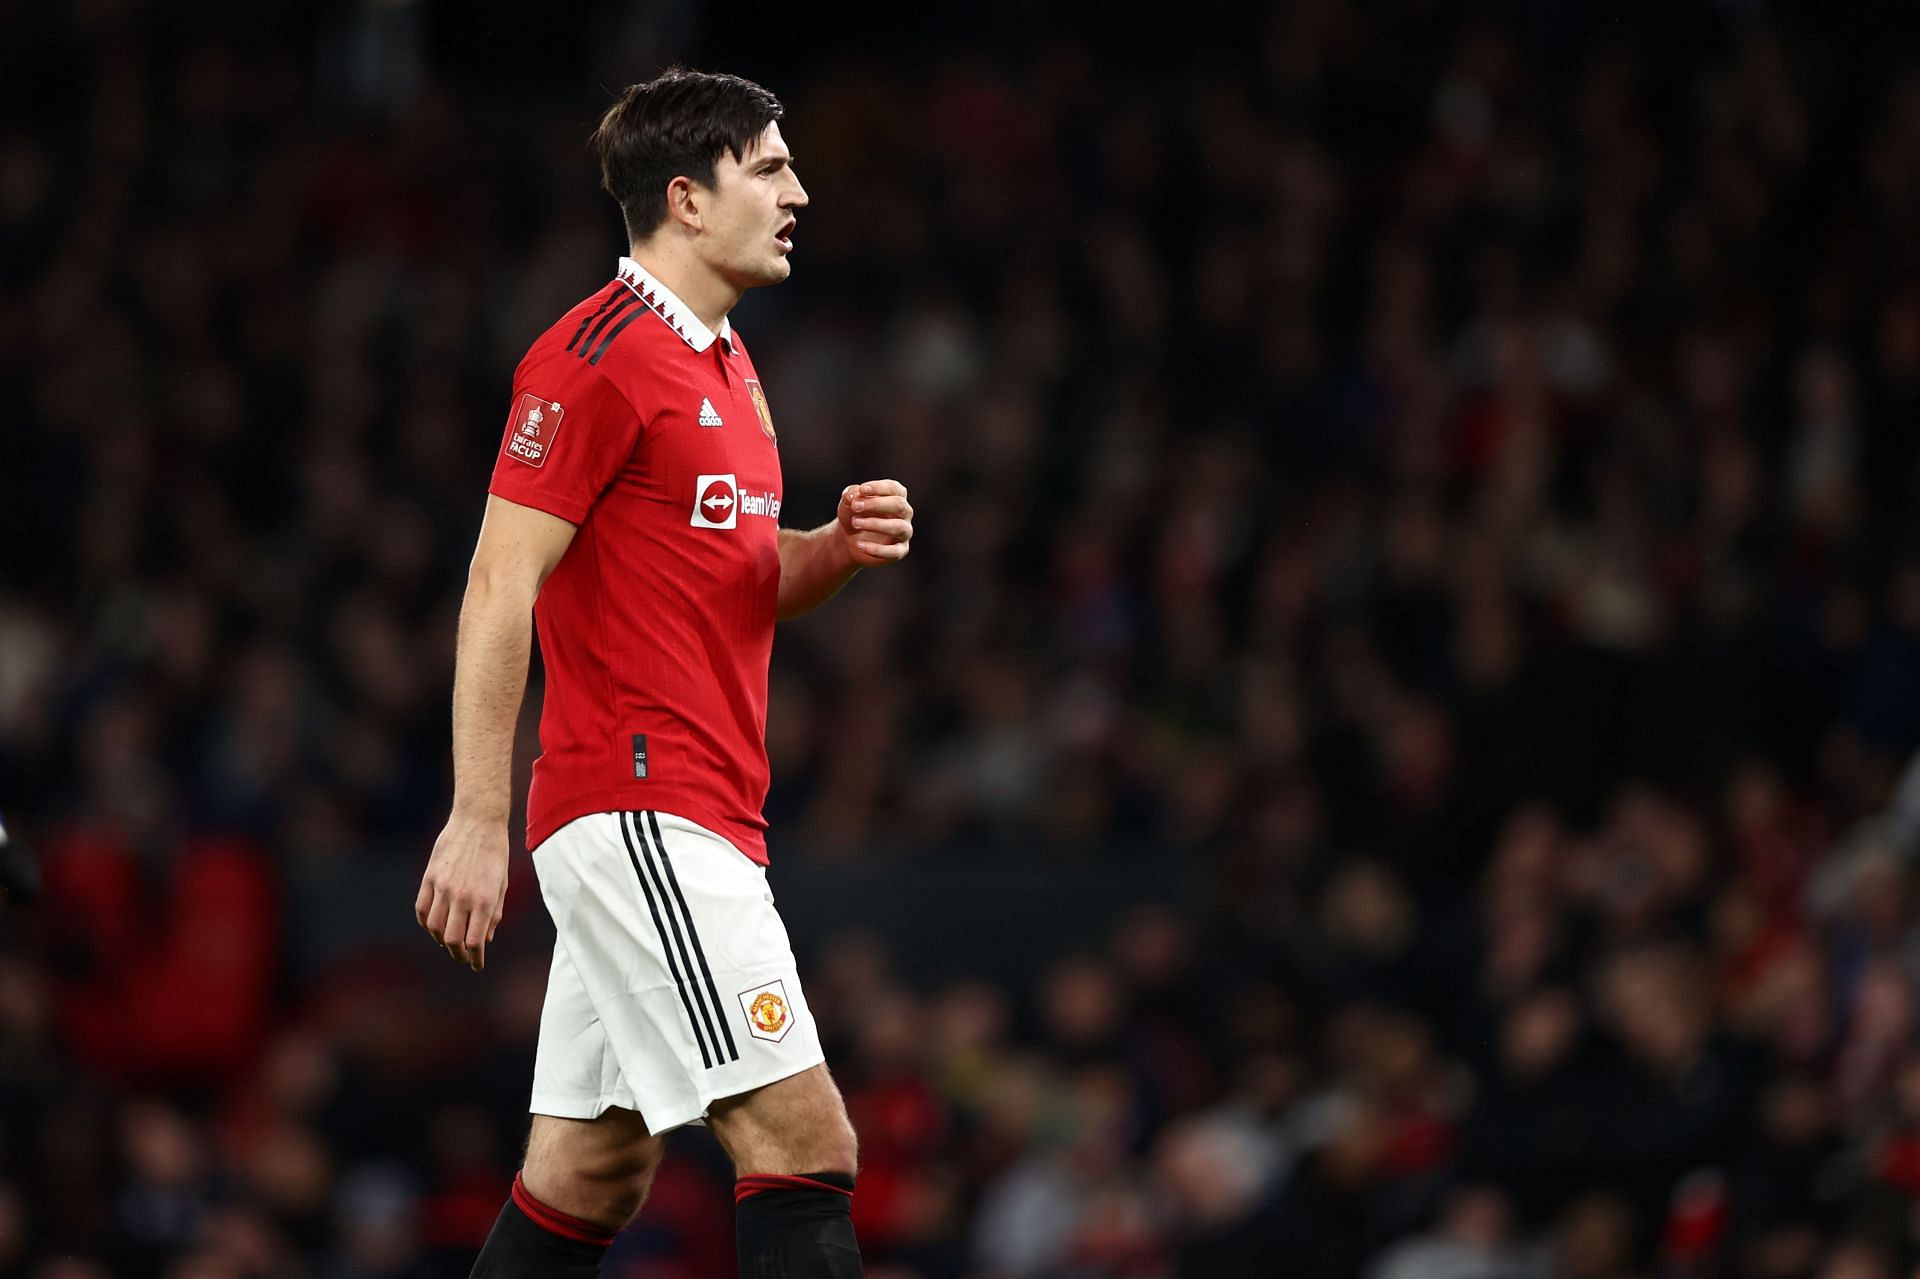 Harry Maguire has struggled for game time this season at Old Trafford.